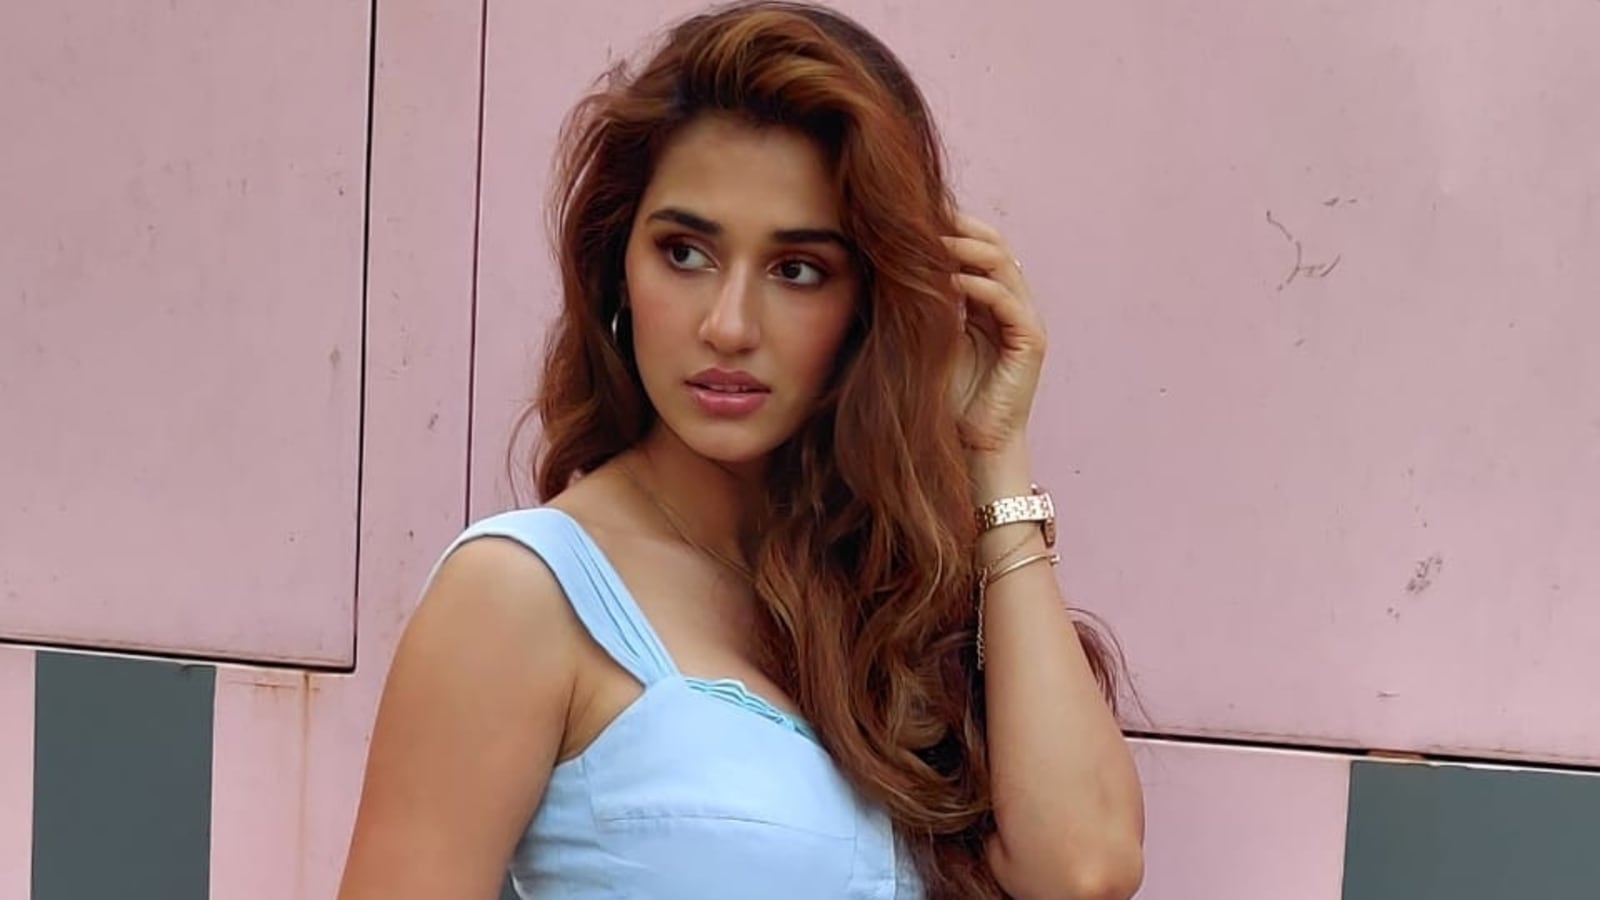 When Disha Patani said no guy has ever told her she is hot or ...